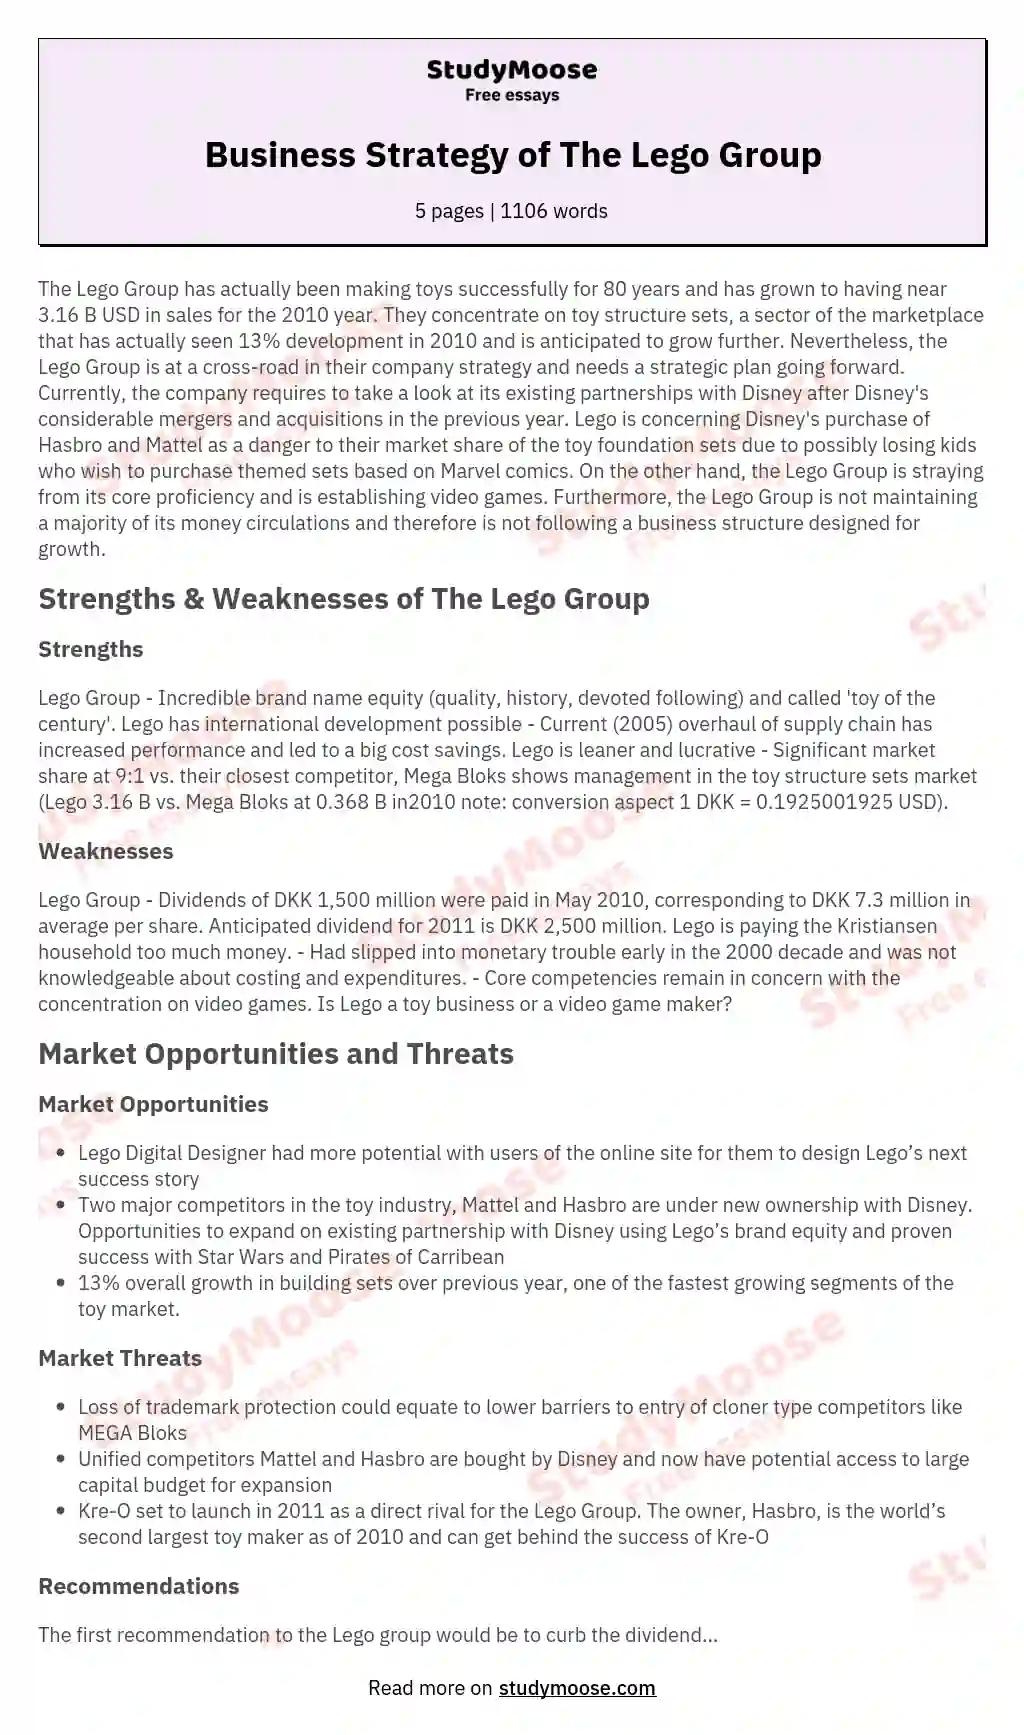 Business Strategy of The Lego Group essay